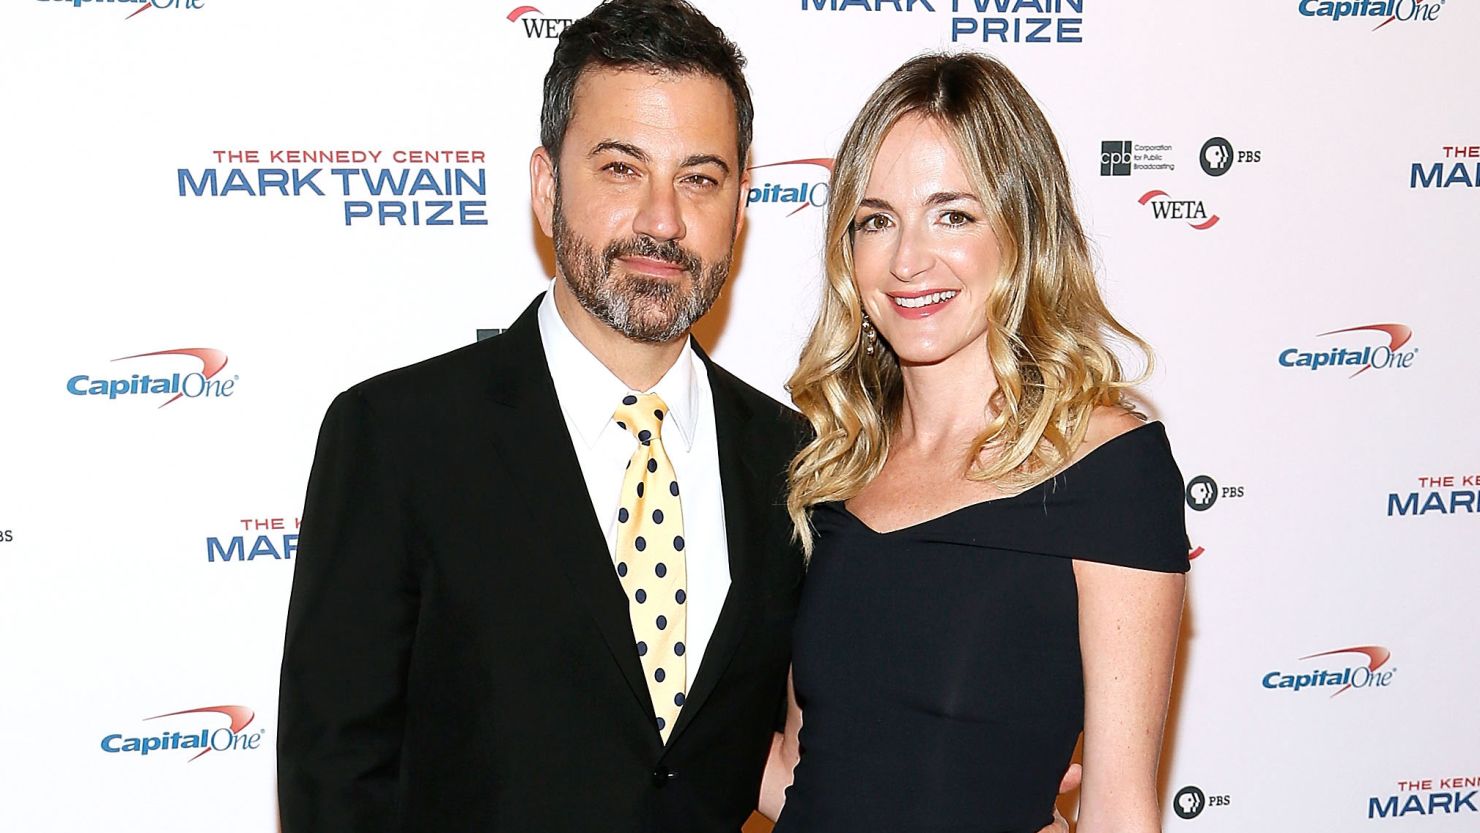 Jimmy Kimmel and his wife Molly McNearney arrive to the 2017 Mark Twain Prize for American Humor at The Kennedy Center on October 22 in Washington.